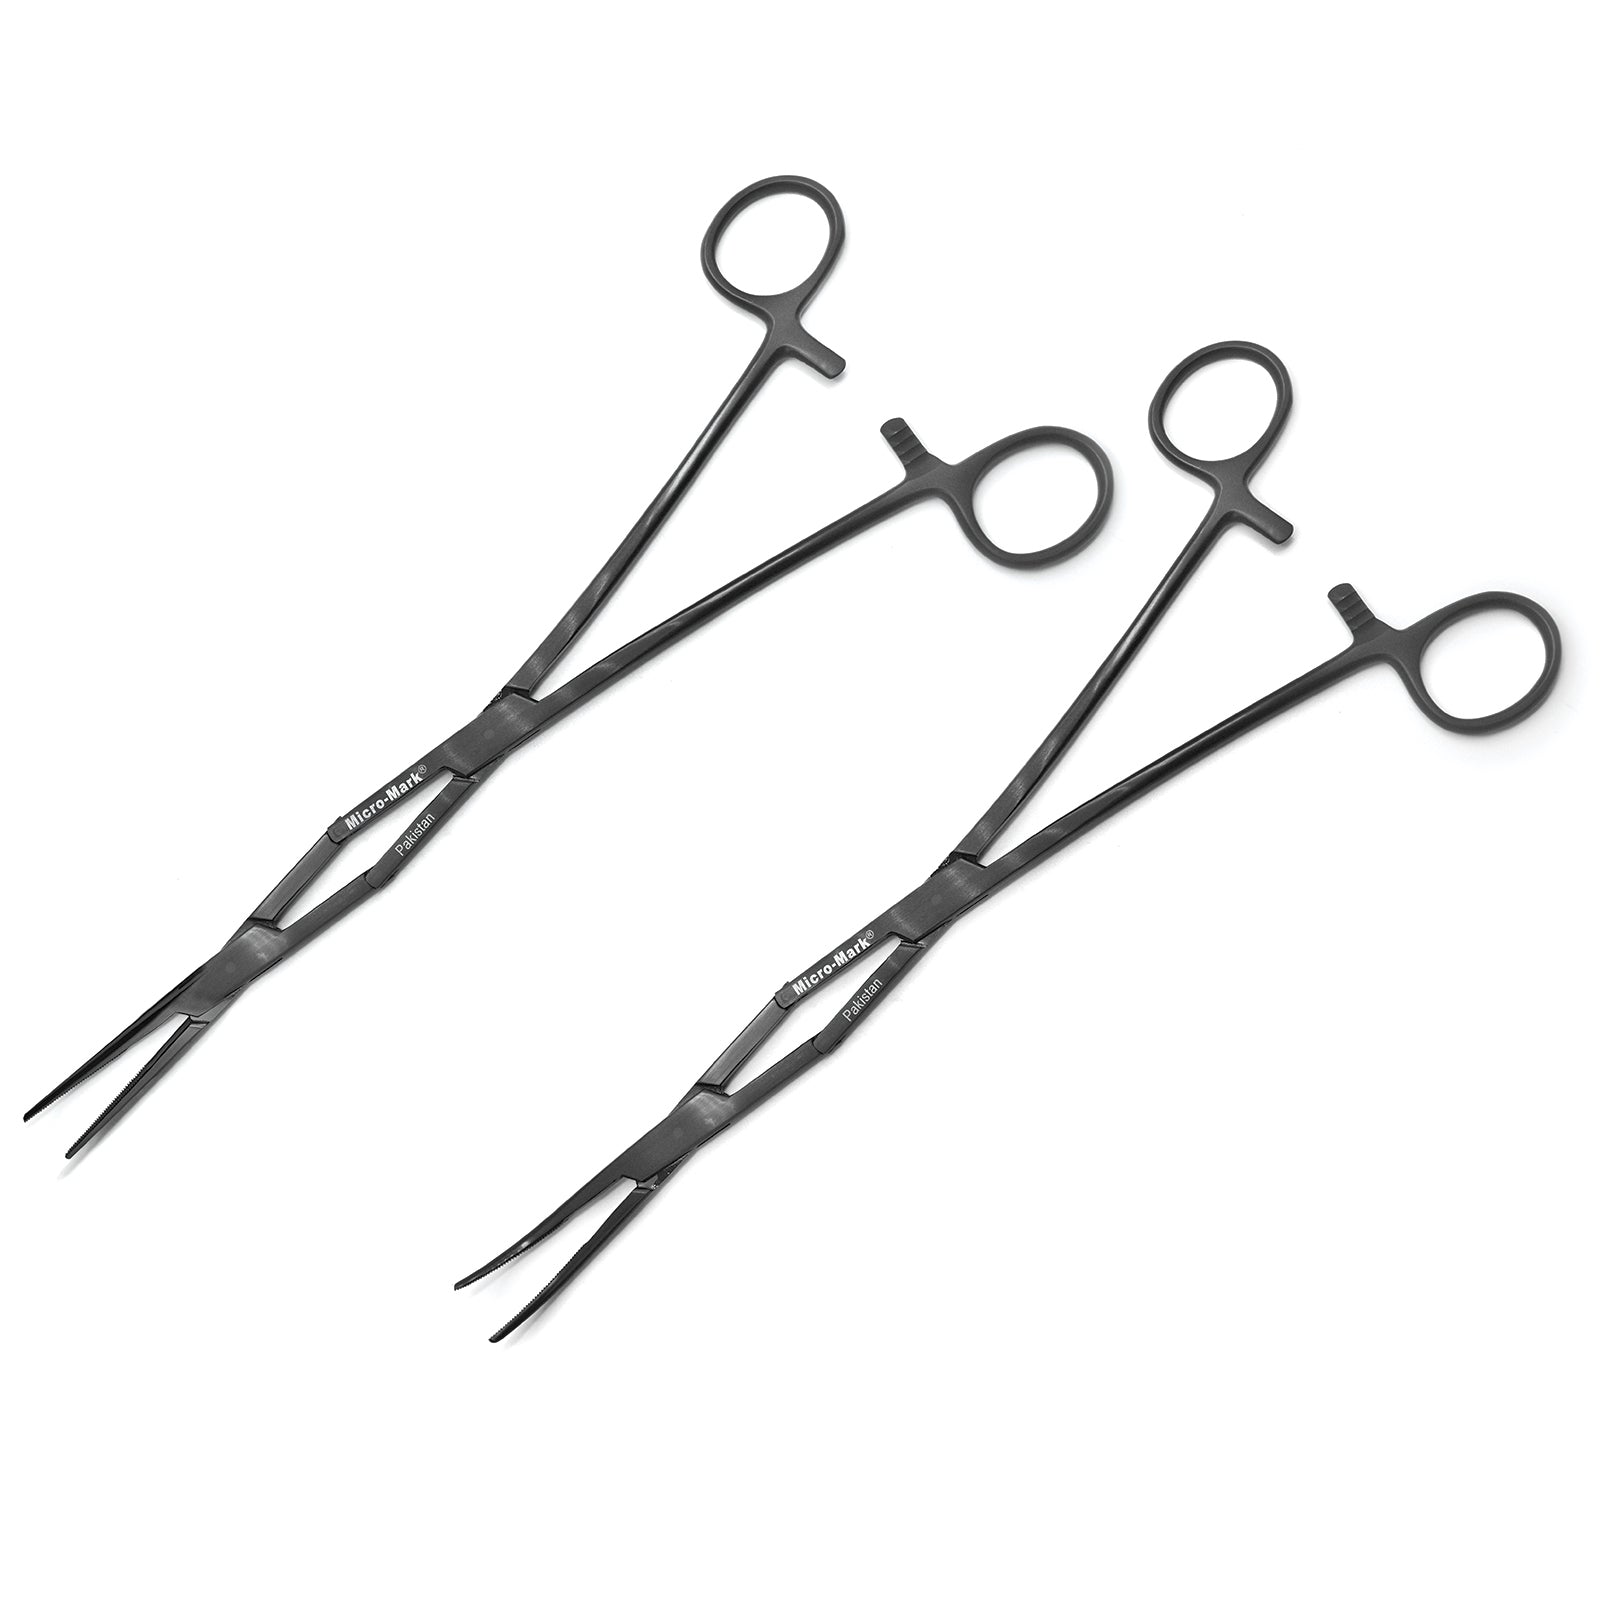 Double - Hinged Extended - Reach Hemostat Set (1 Each Straight Tip and 30 - Degree Curved Tip) - Micro - Mark Tool Clamps & Vises